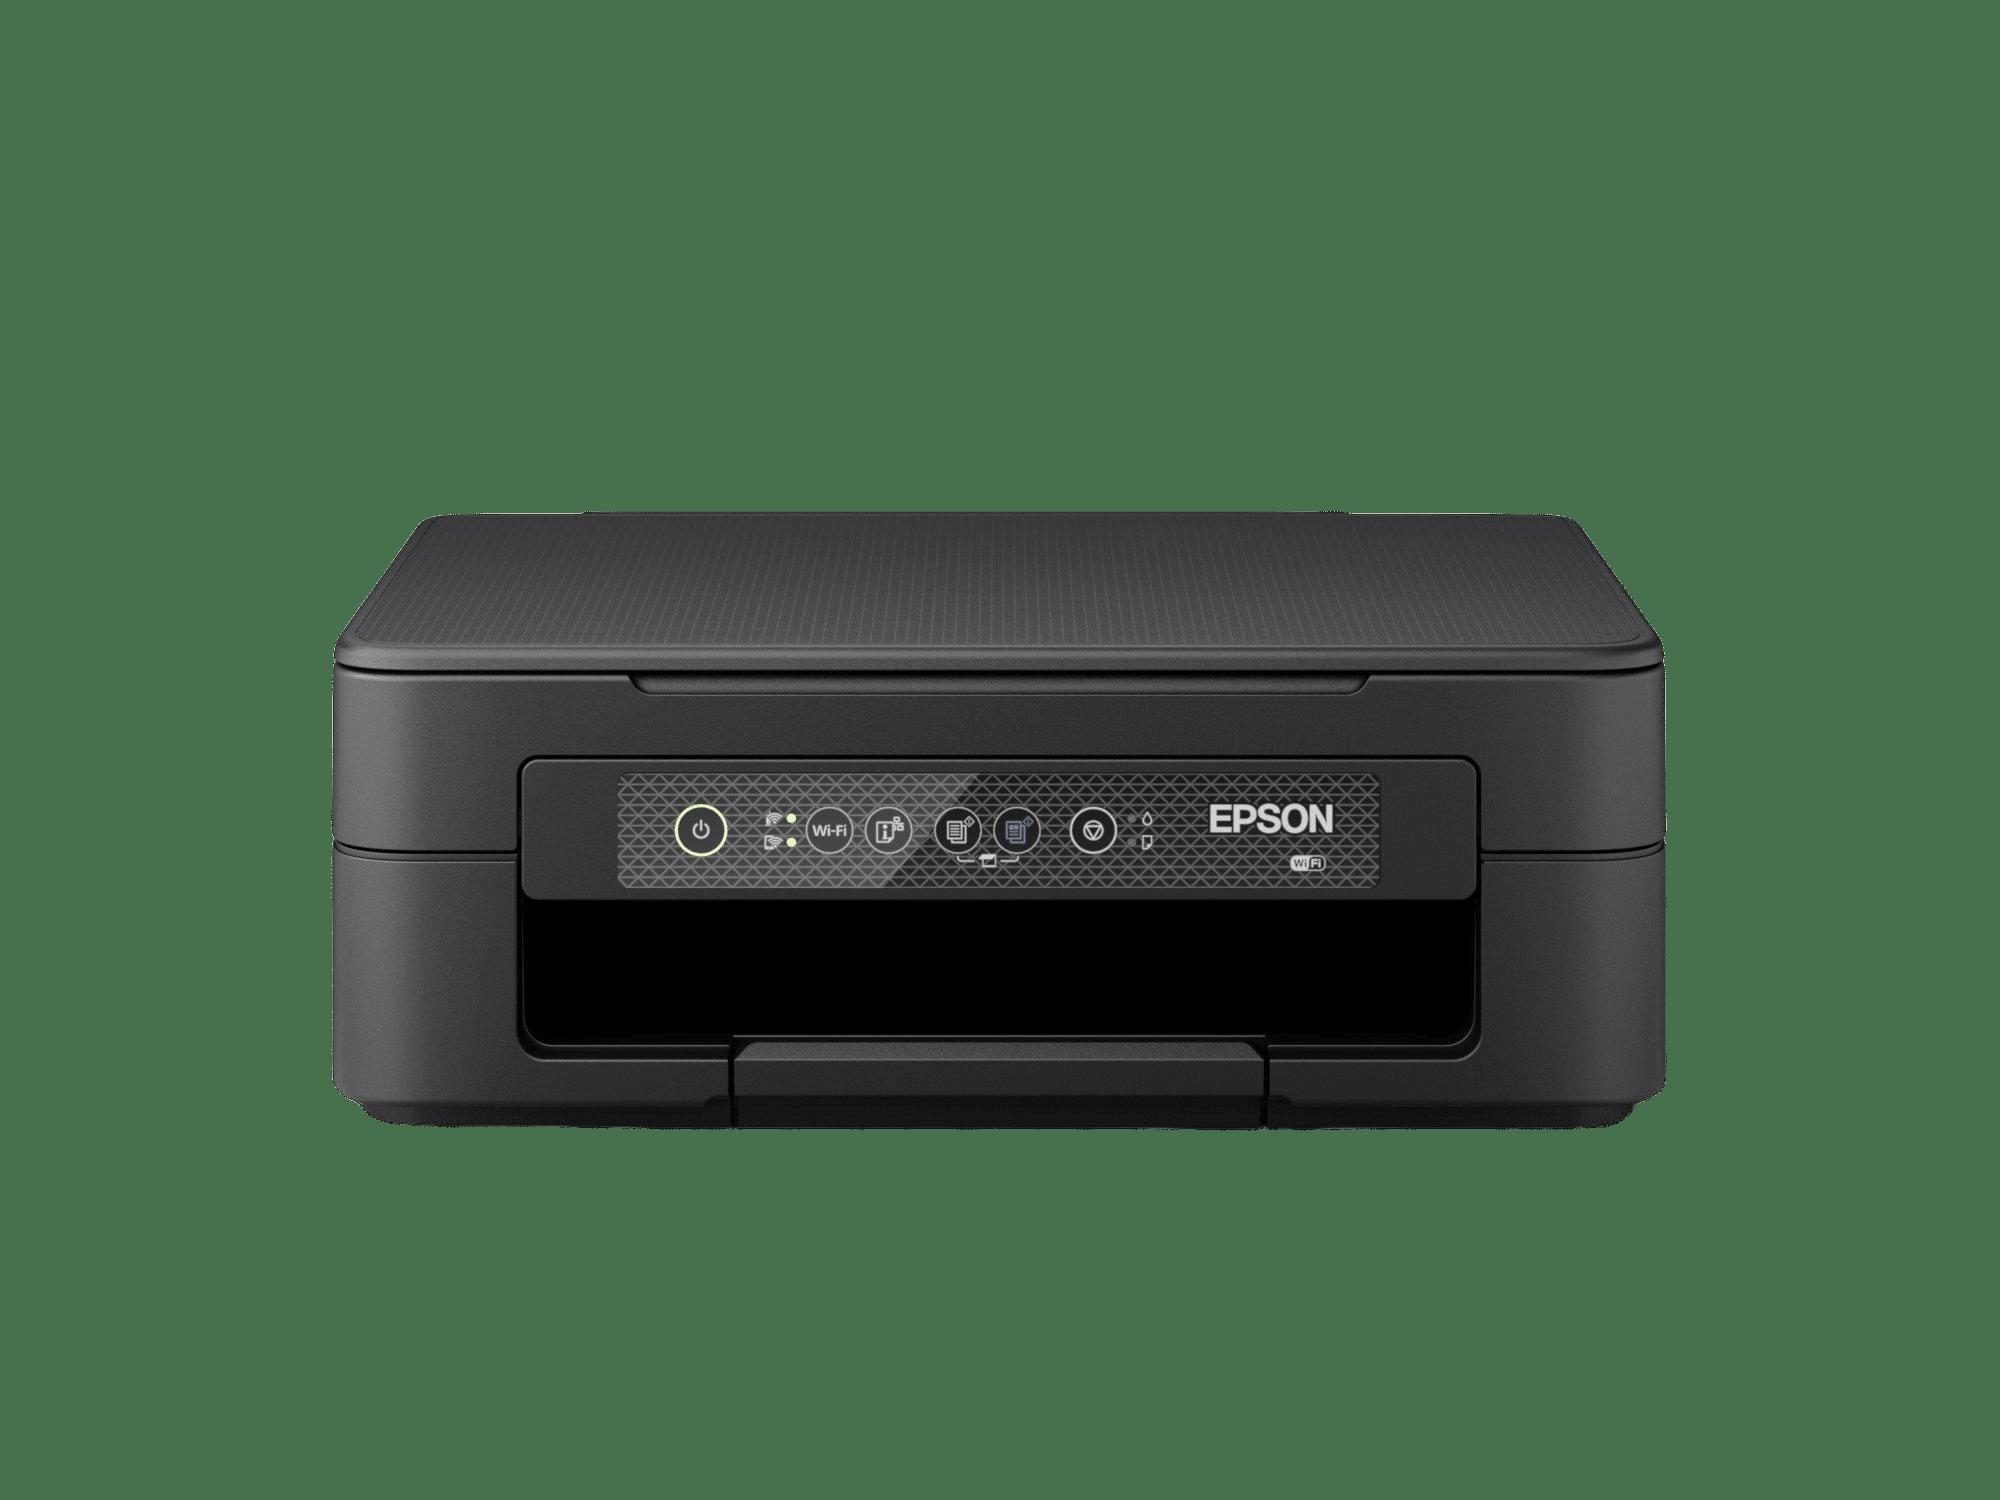 EPSON Expression Home XP-2200